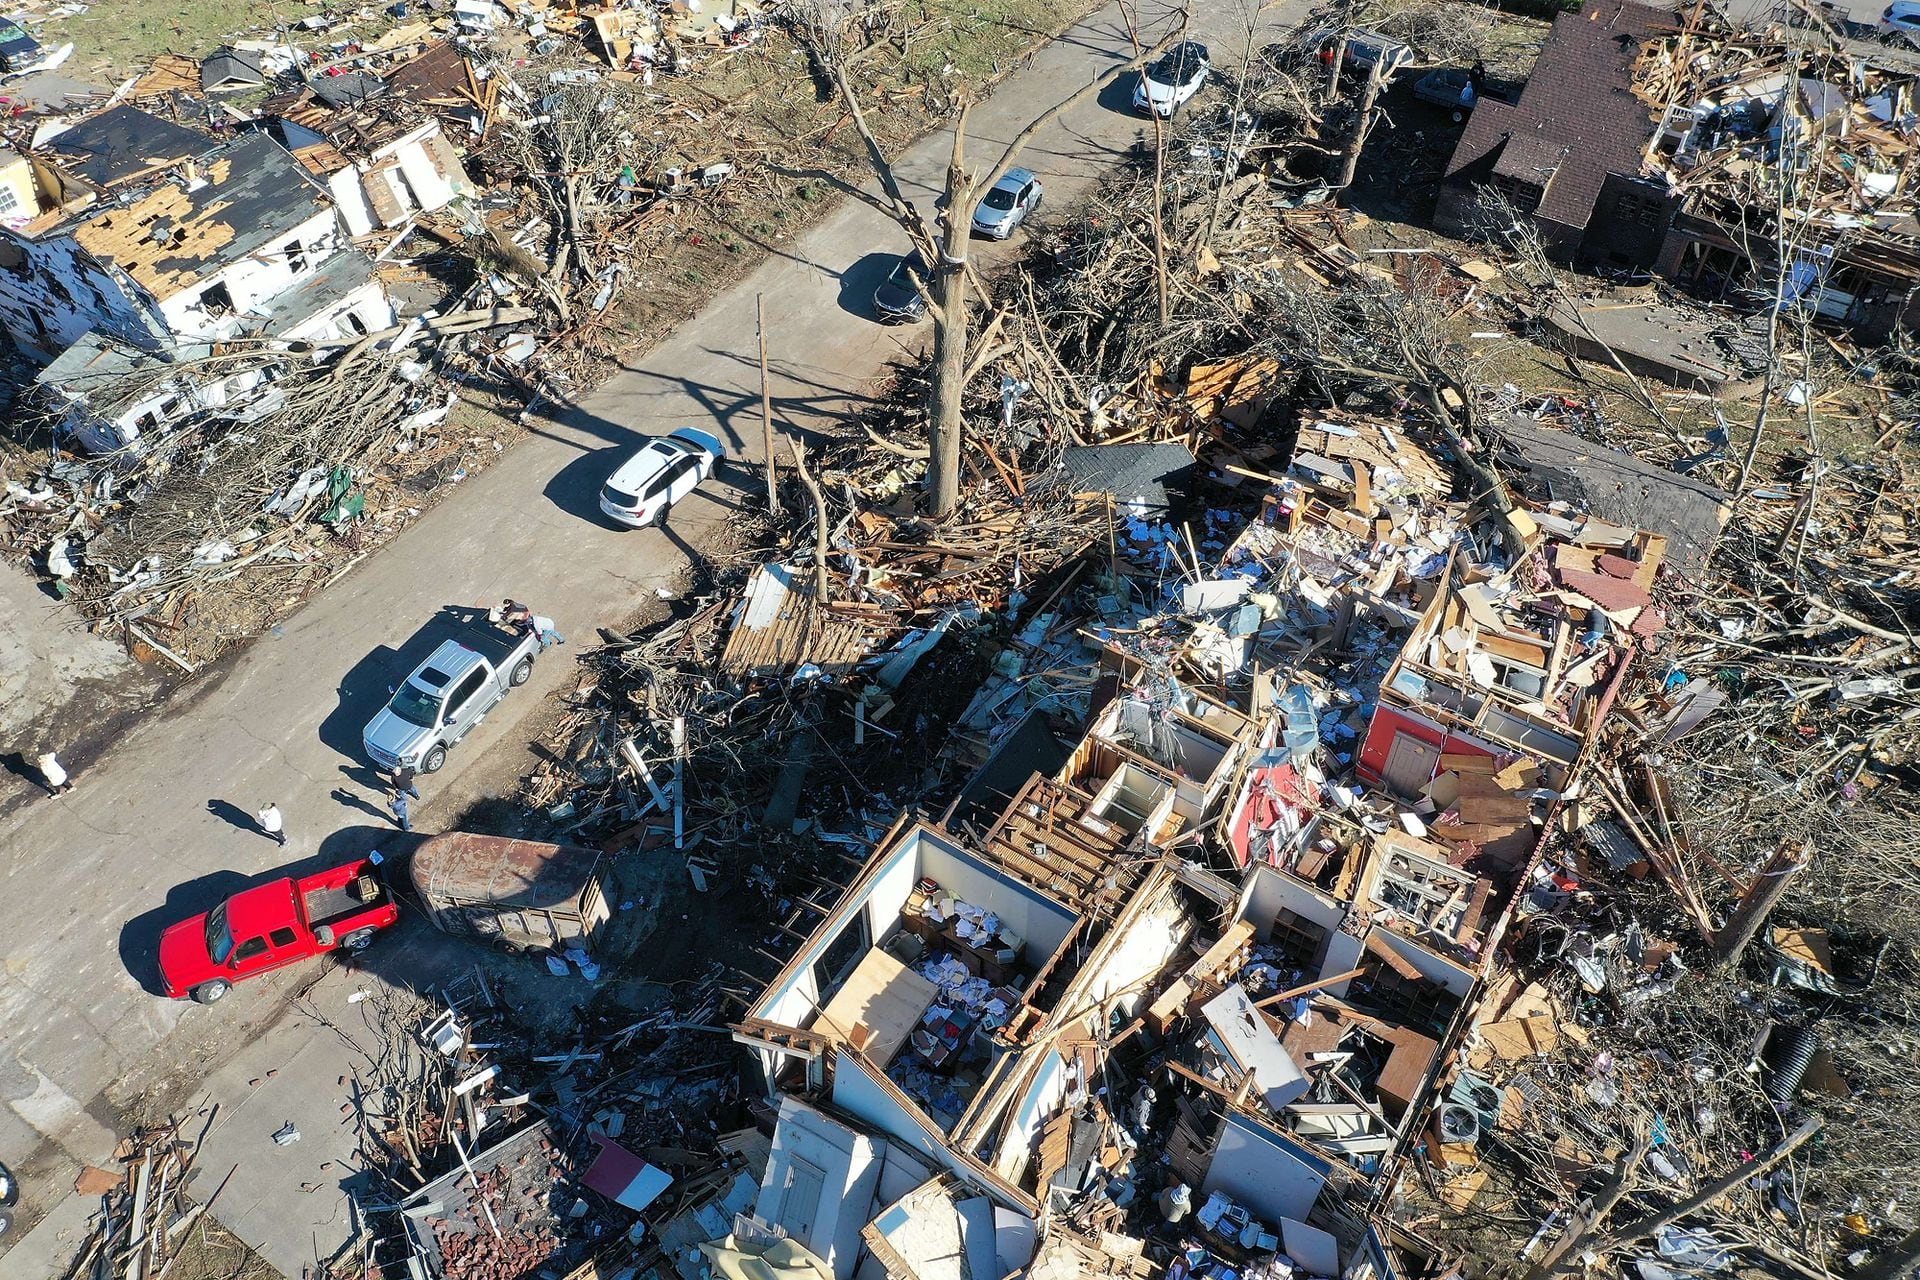 Mayfield, a city of 10,000 people near the western tip of Kentucky, was devastated 